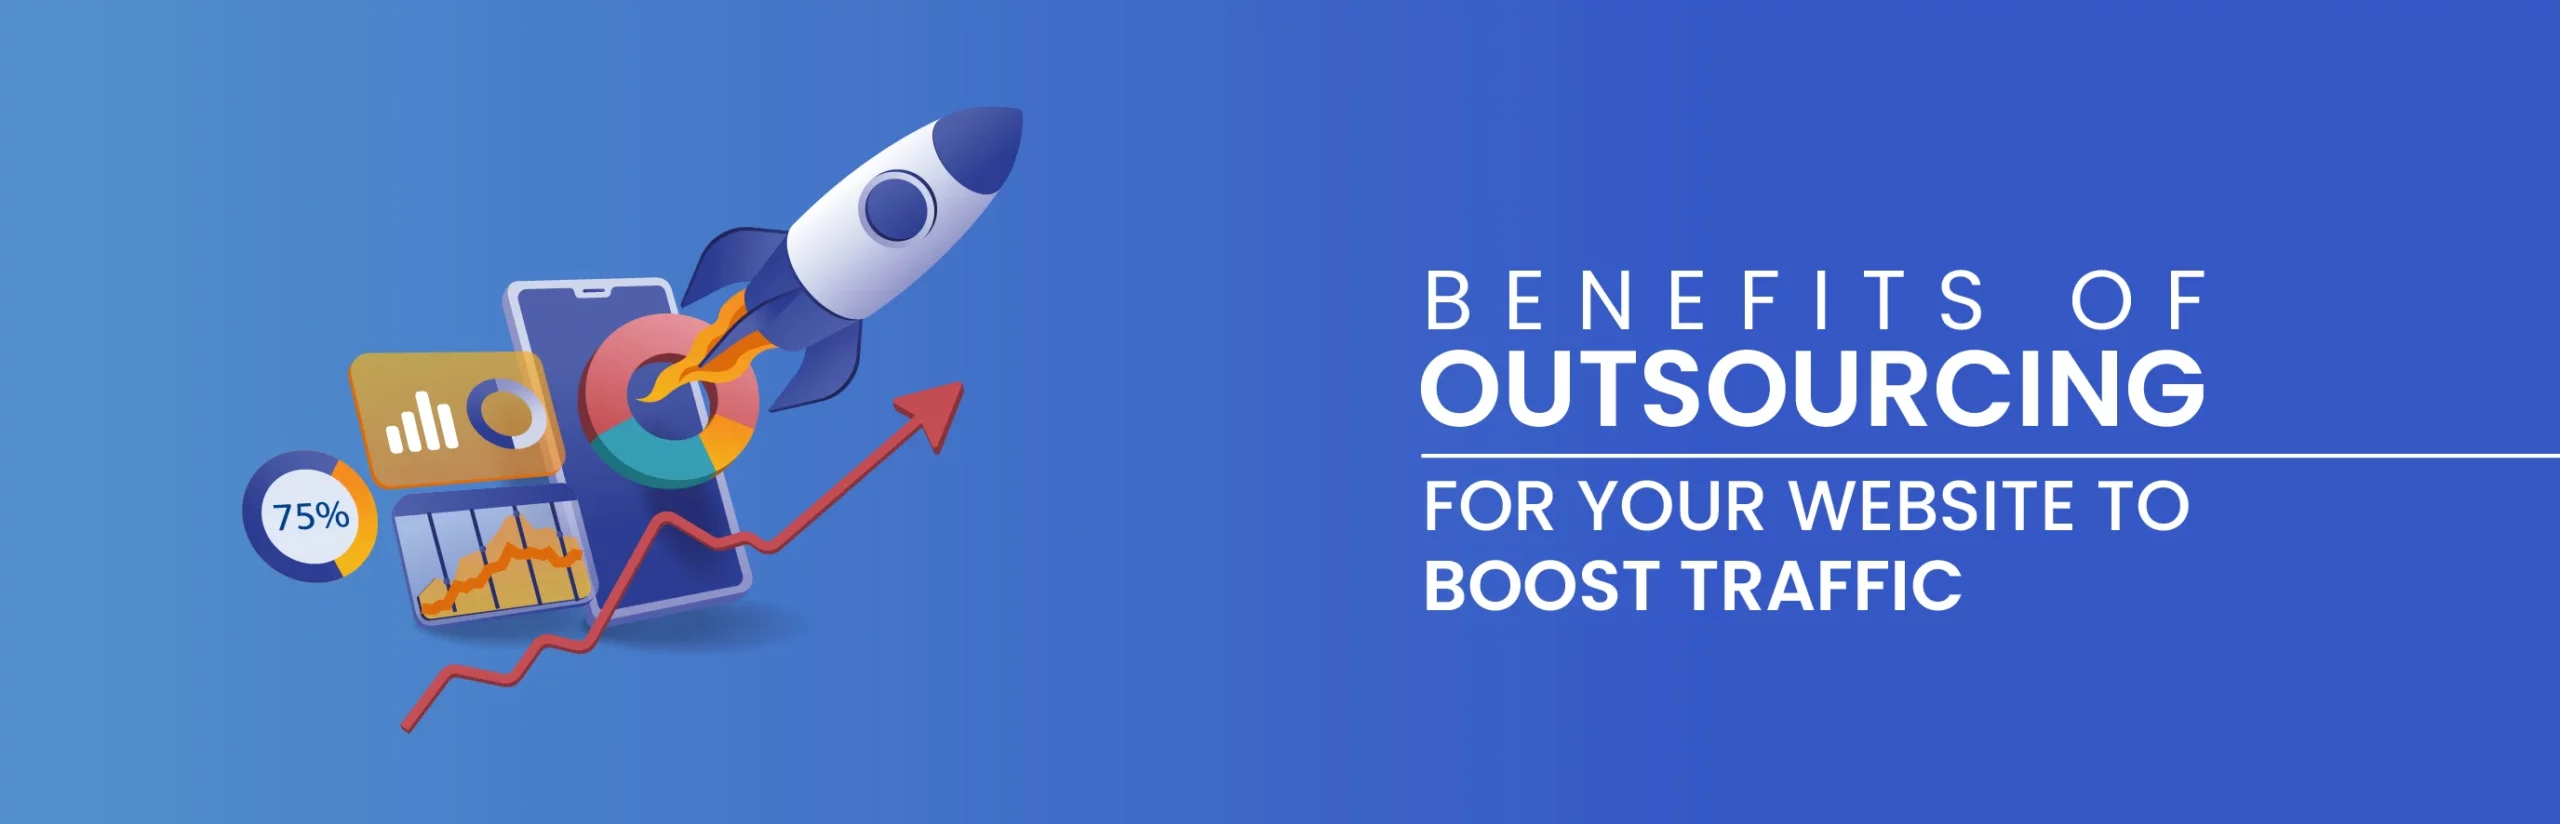 Benefits of Outsourcing for Your Website to Boost Traffic